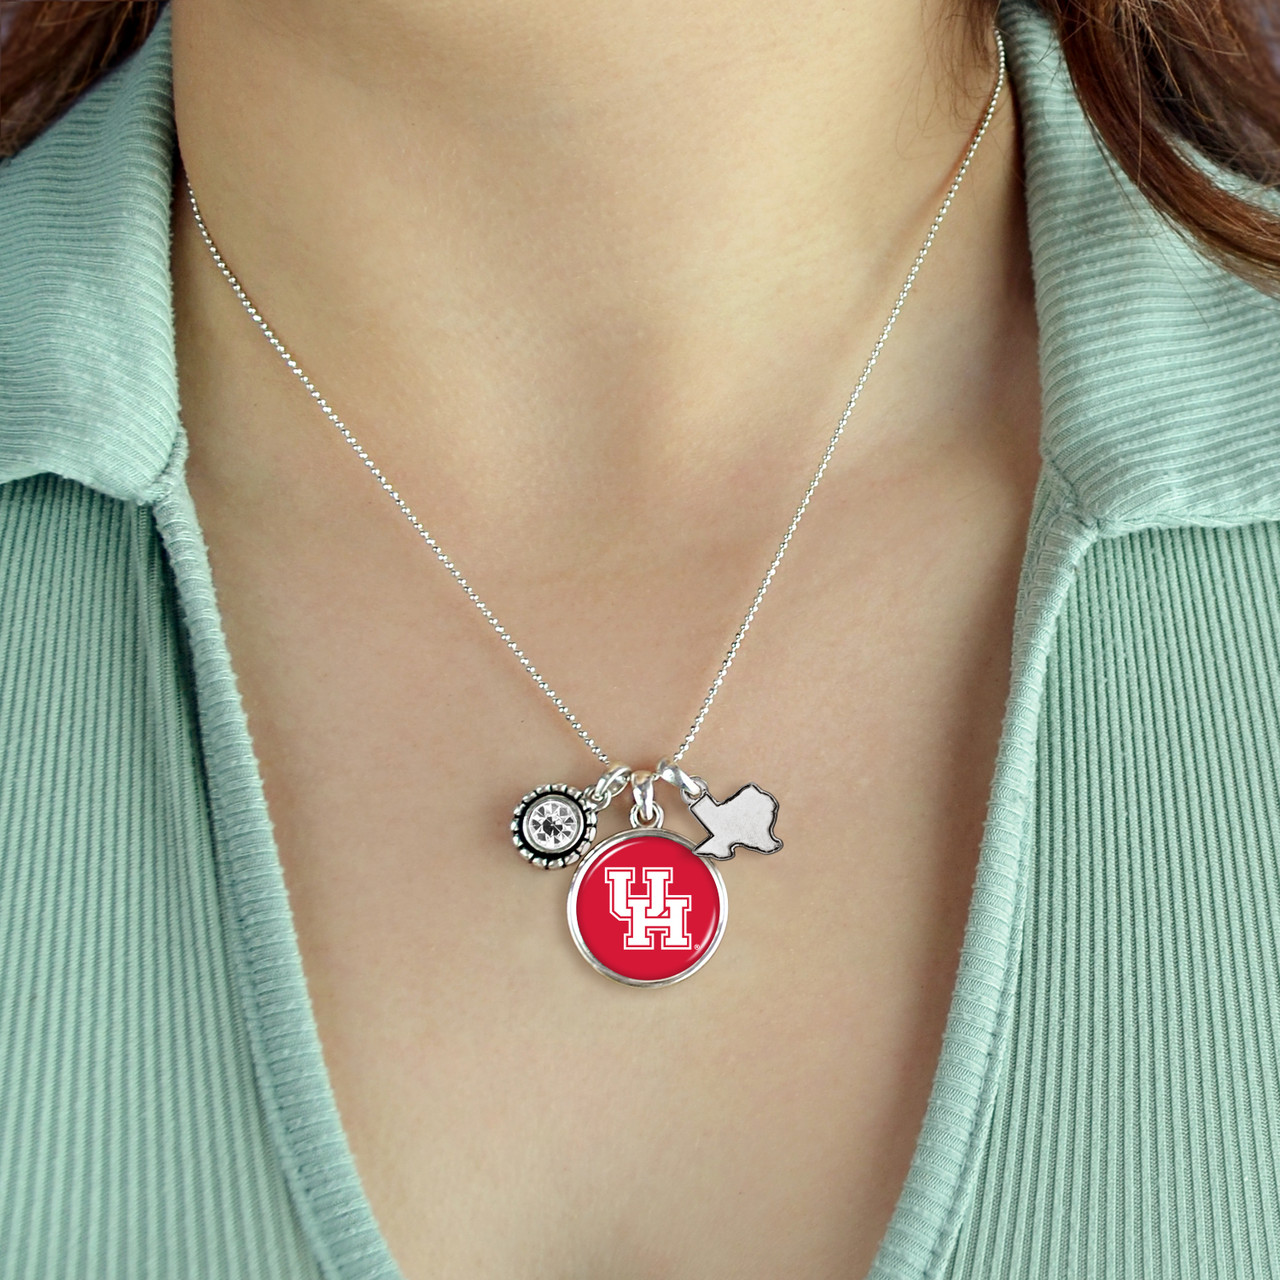 Houston Cougars Necklace- Home Sweet School